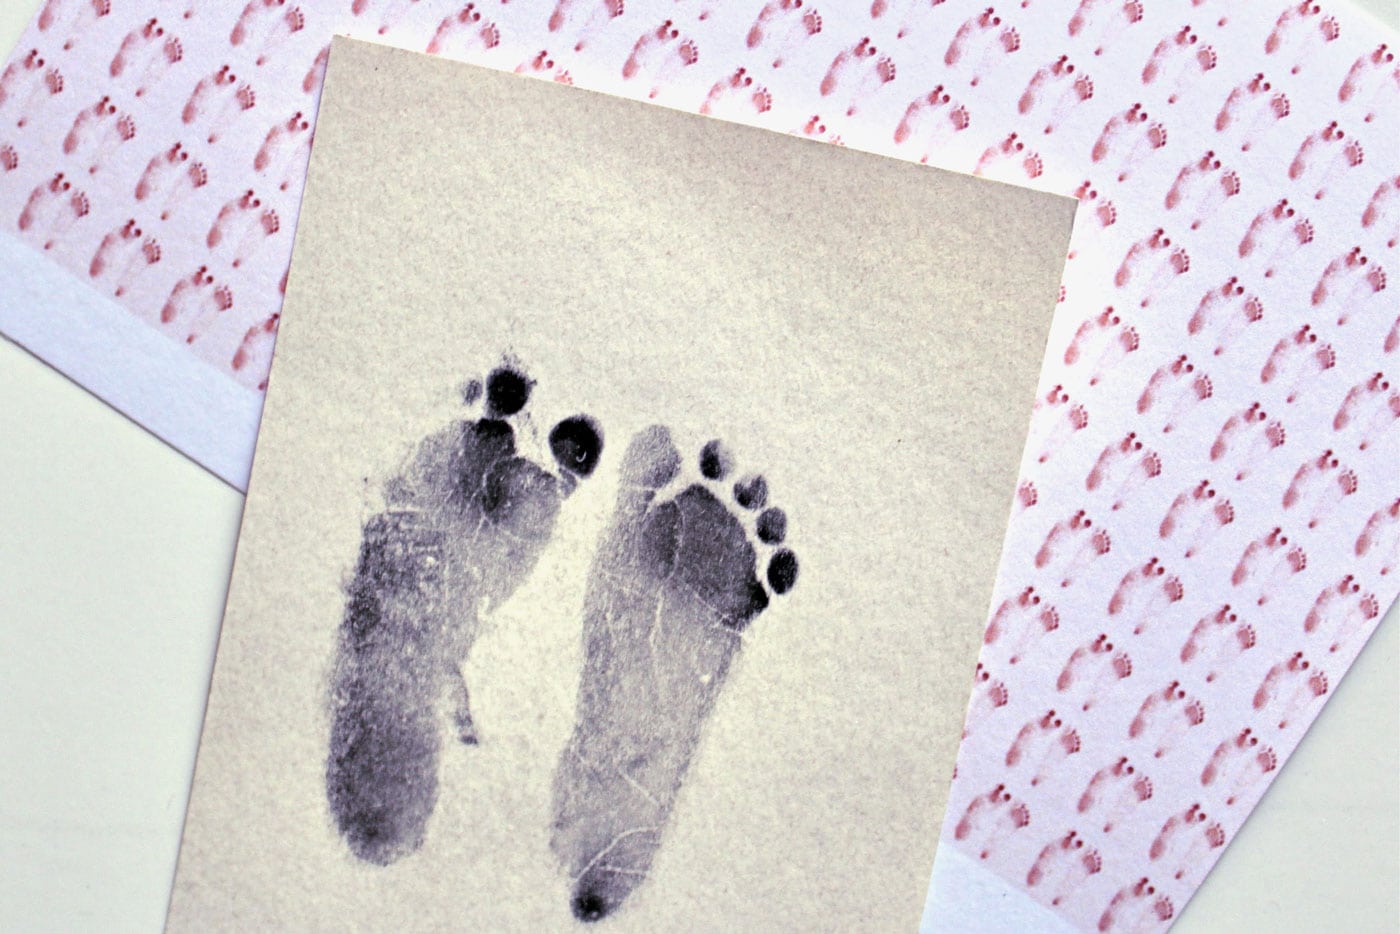 Image of baby foot prints and paper